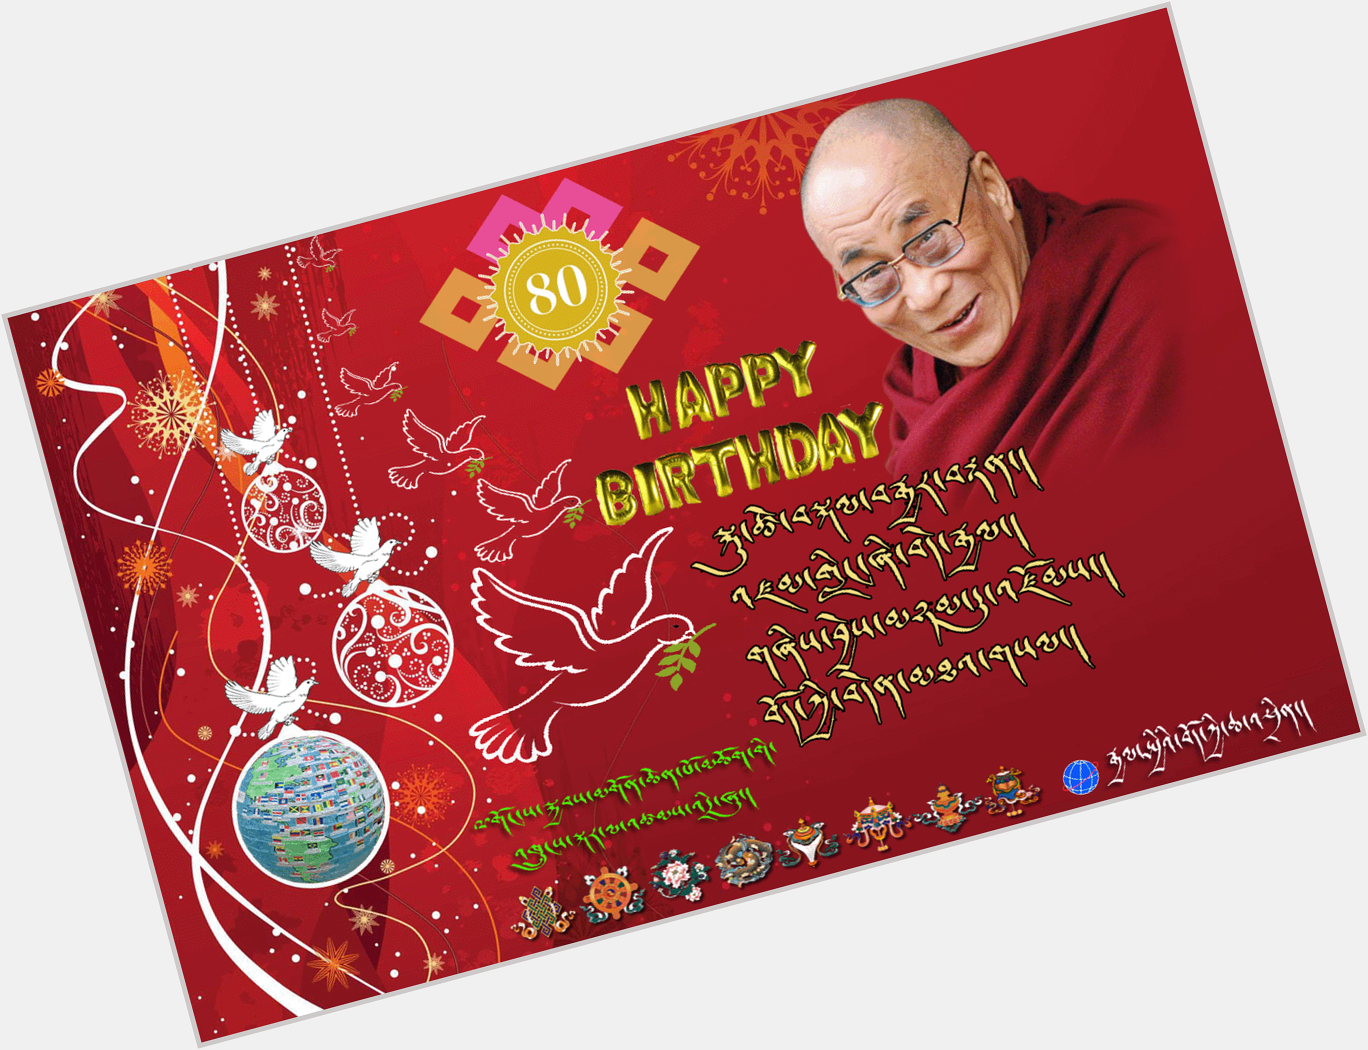 Happy 80th Birthday Your Holiness the XIV Dalai Lama
We pray for your long life and good health. 